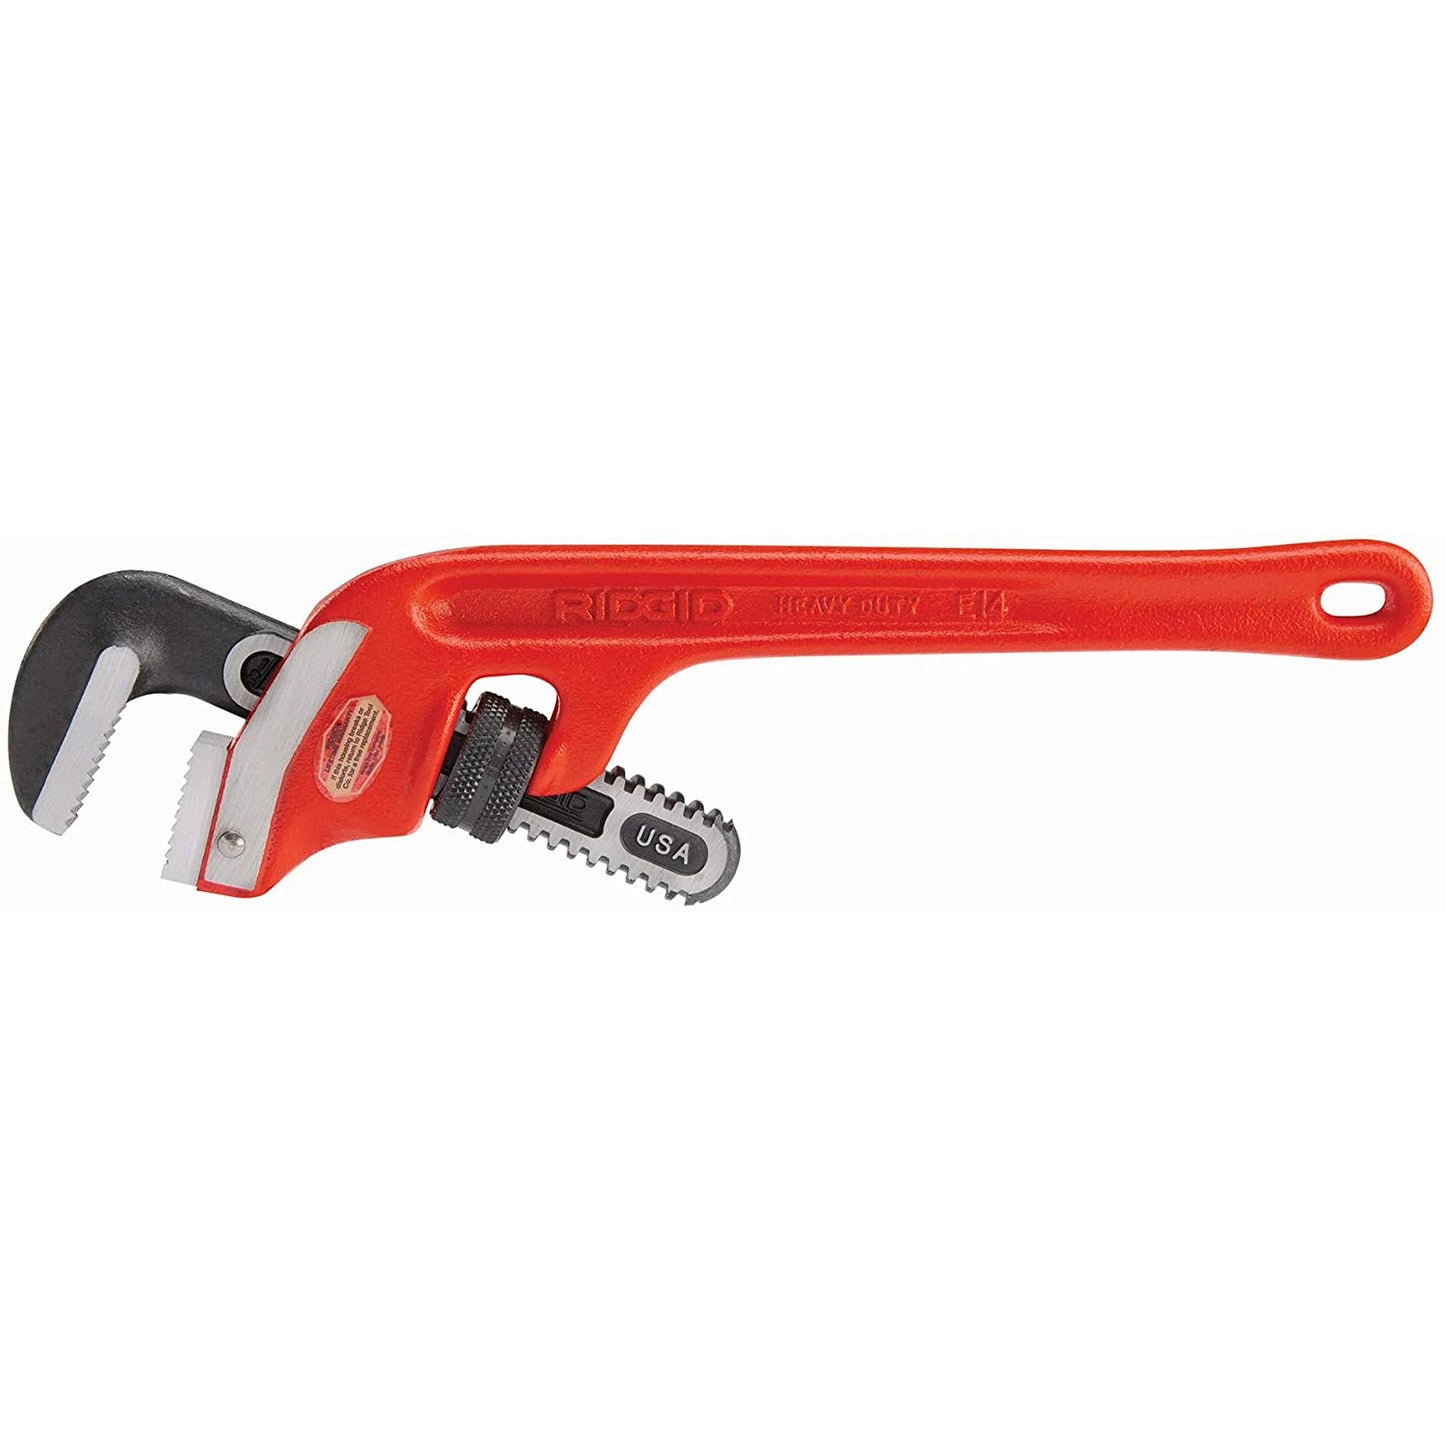 RIDGID 31070 14-Inch Heavy-Duty End Pipe Wrench with 2" pipe capacity